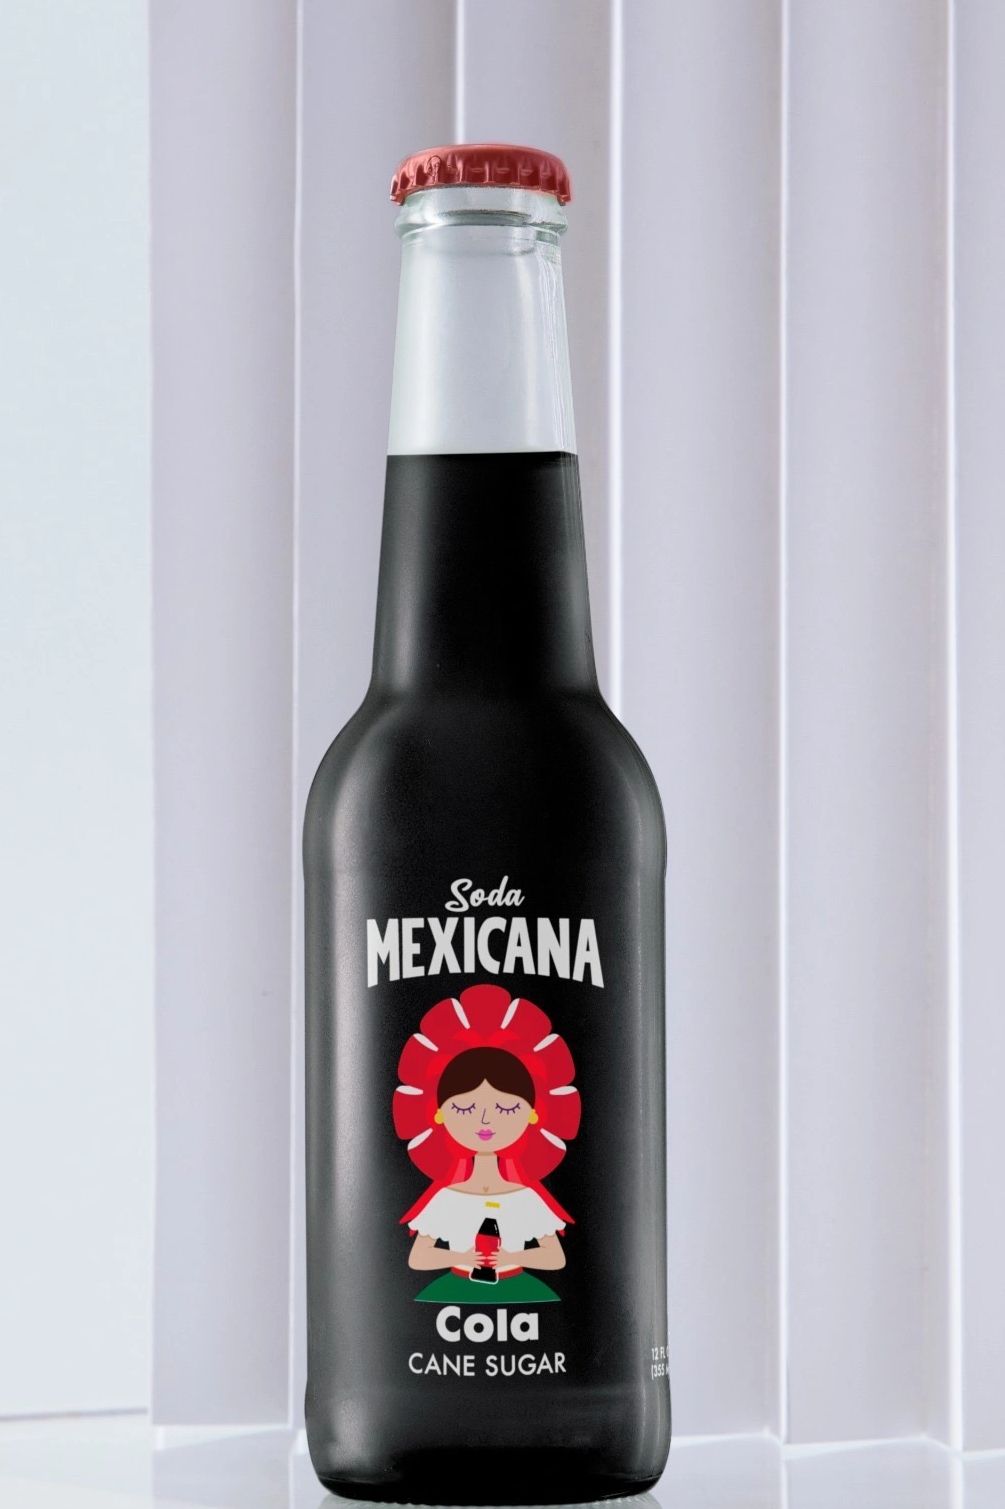 Transport yourself to the lively streets of Mexico with every sip of this authentic Mexican Cola. Th